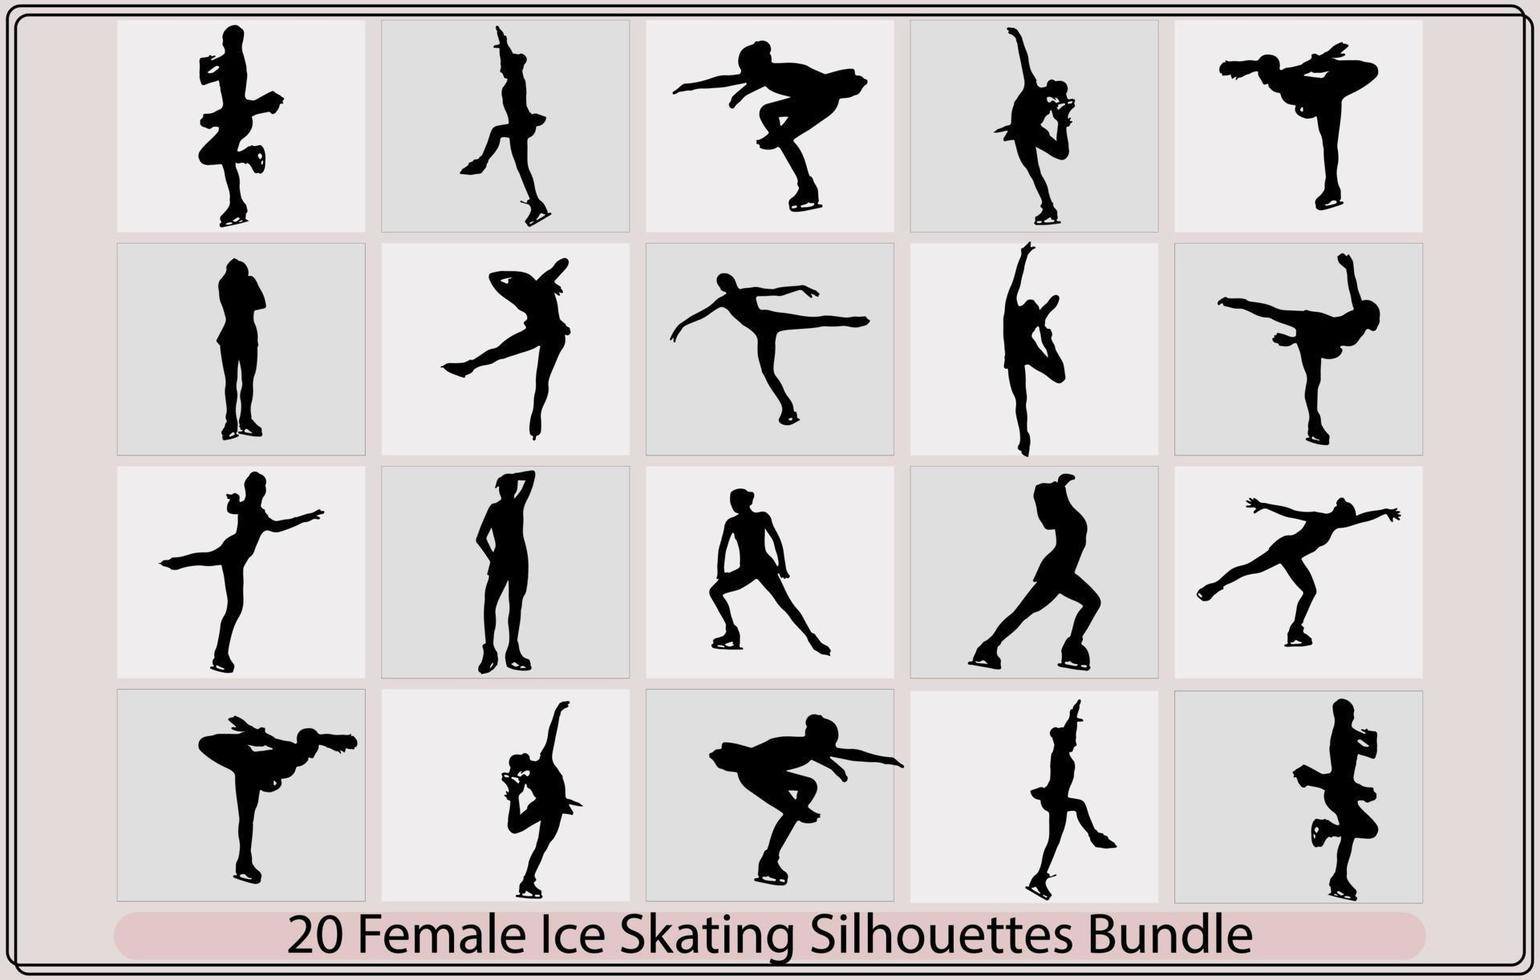 Skating people silhouette,Figure ice skating vector silhouettes,Over ten people silhouettes skating on ice,A child in silhouette ice skating in Christmas or winter clothing